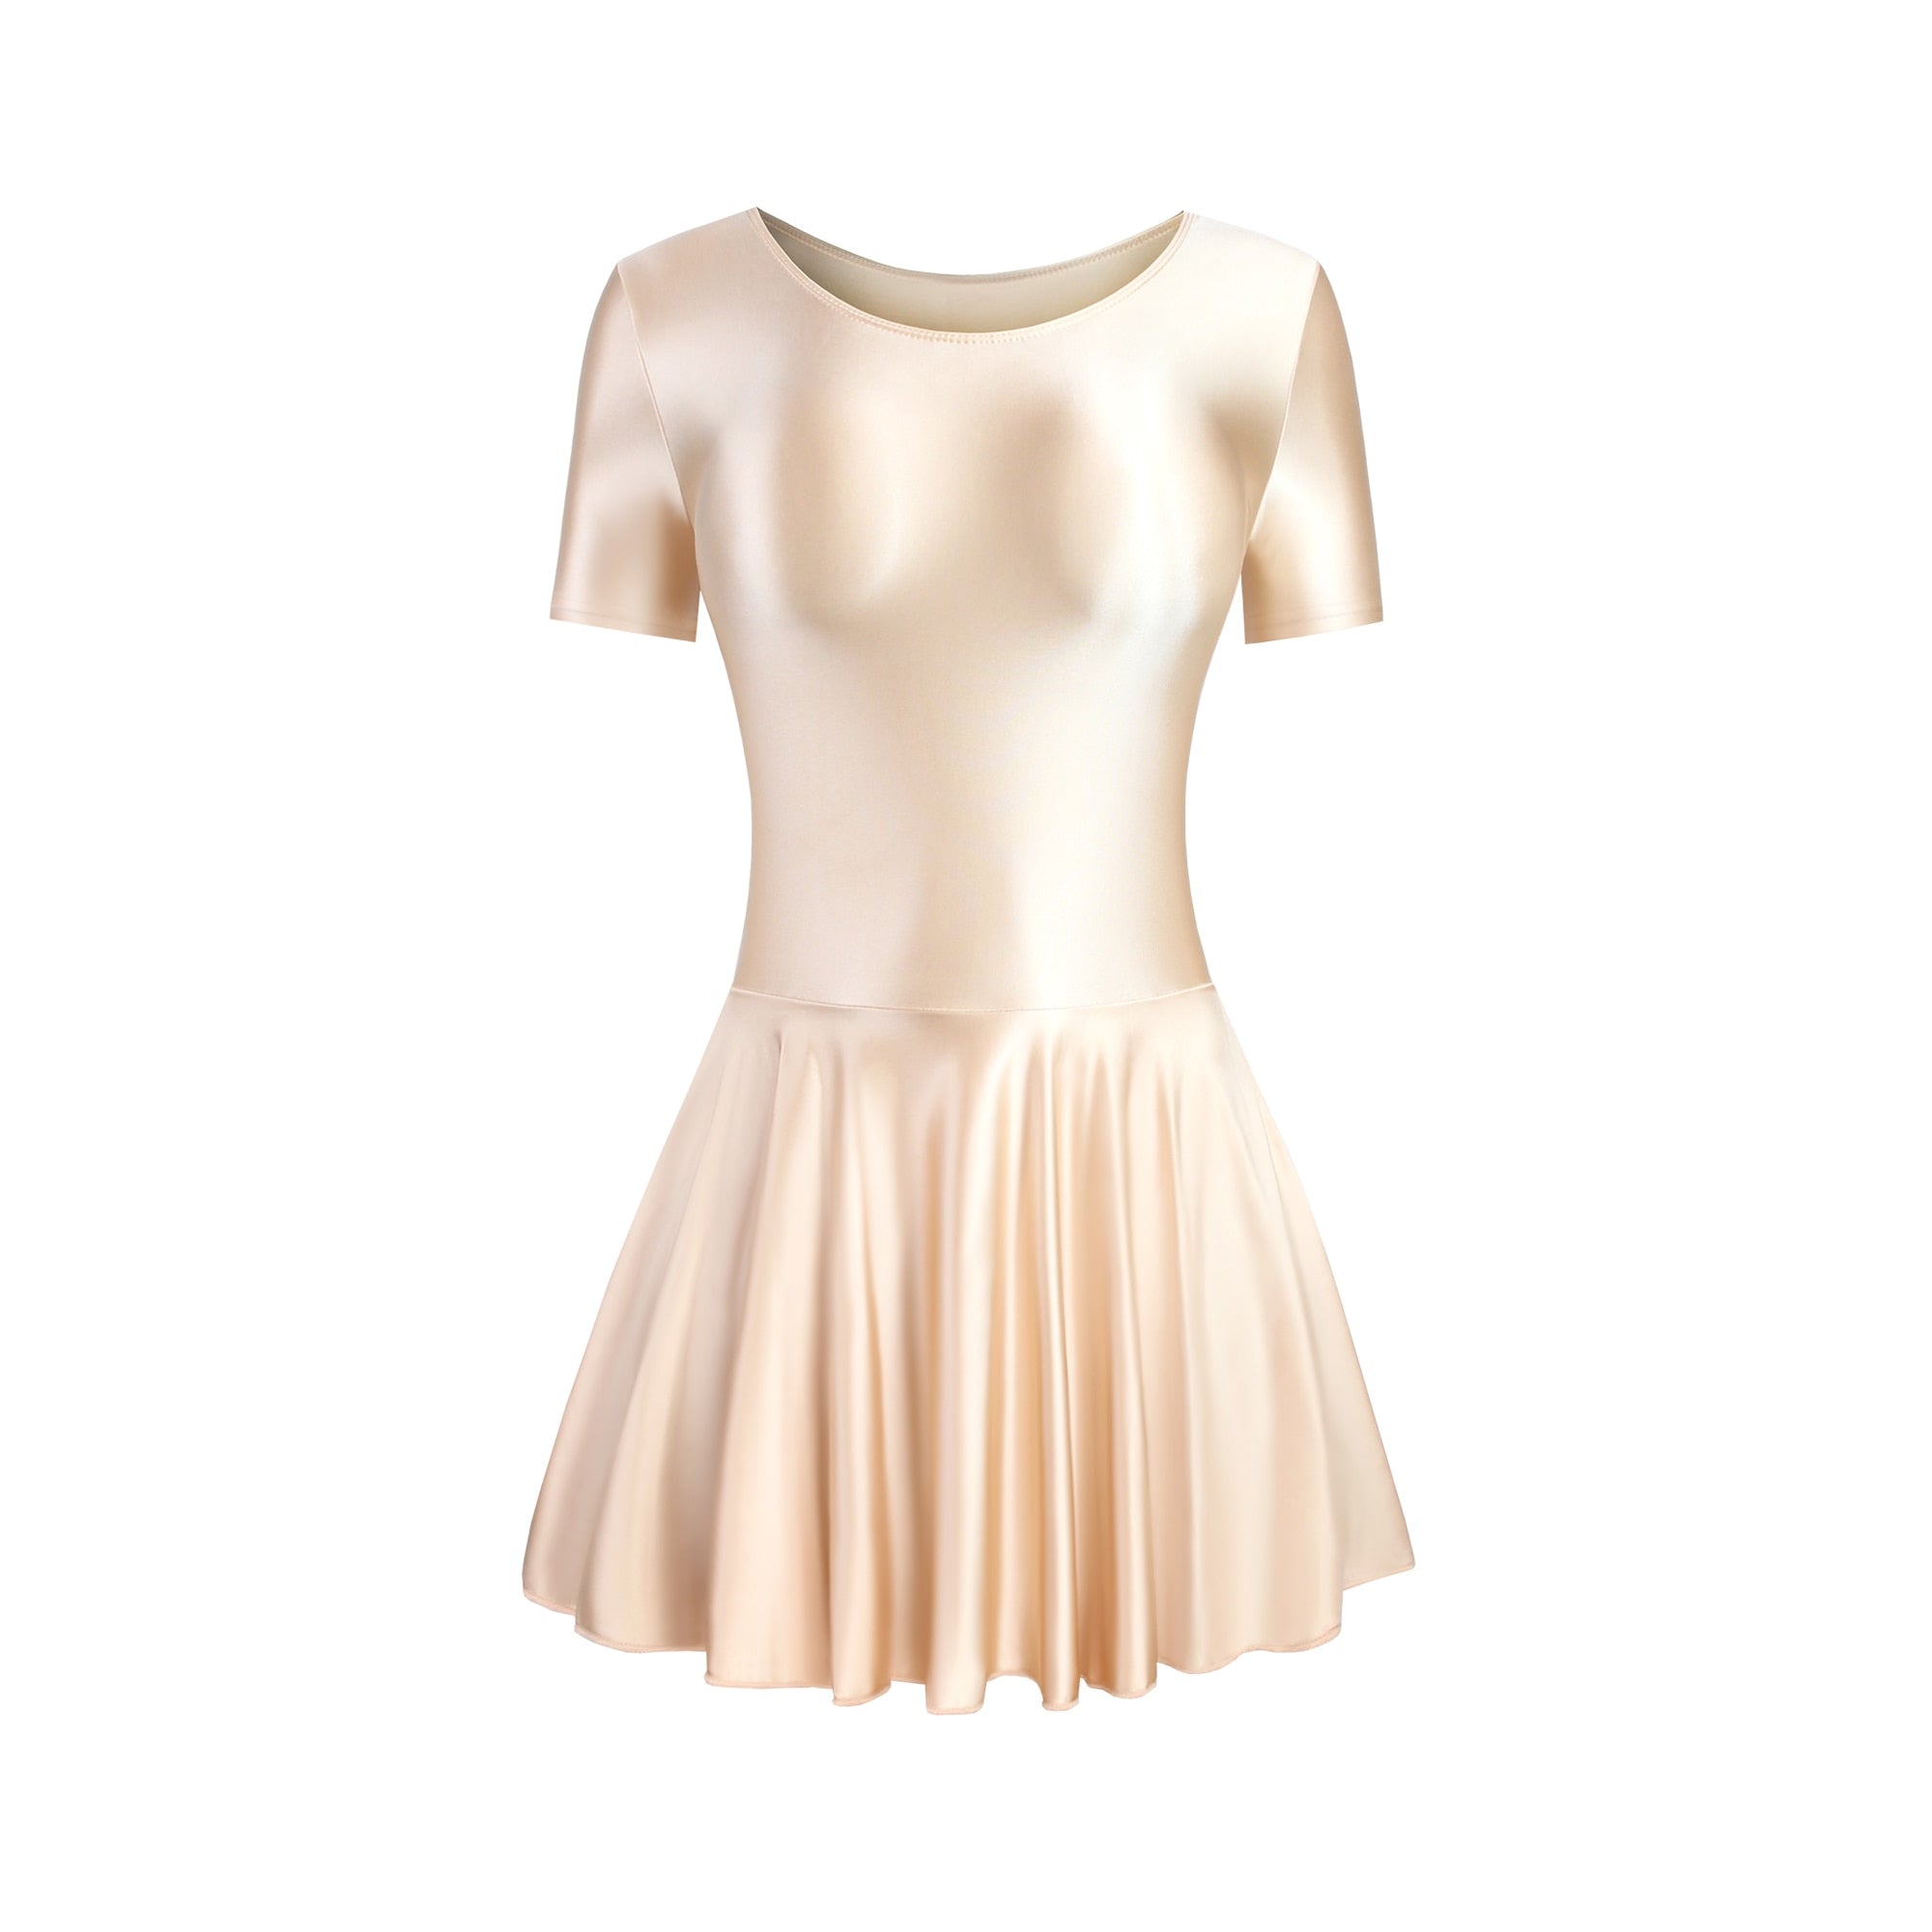 Front view of champagne leotard dress featuring a scoop neckline, a scoop back cut, short sleeves, and an attached skirt.